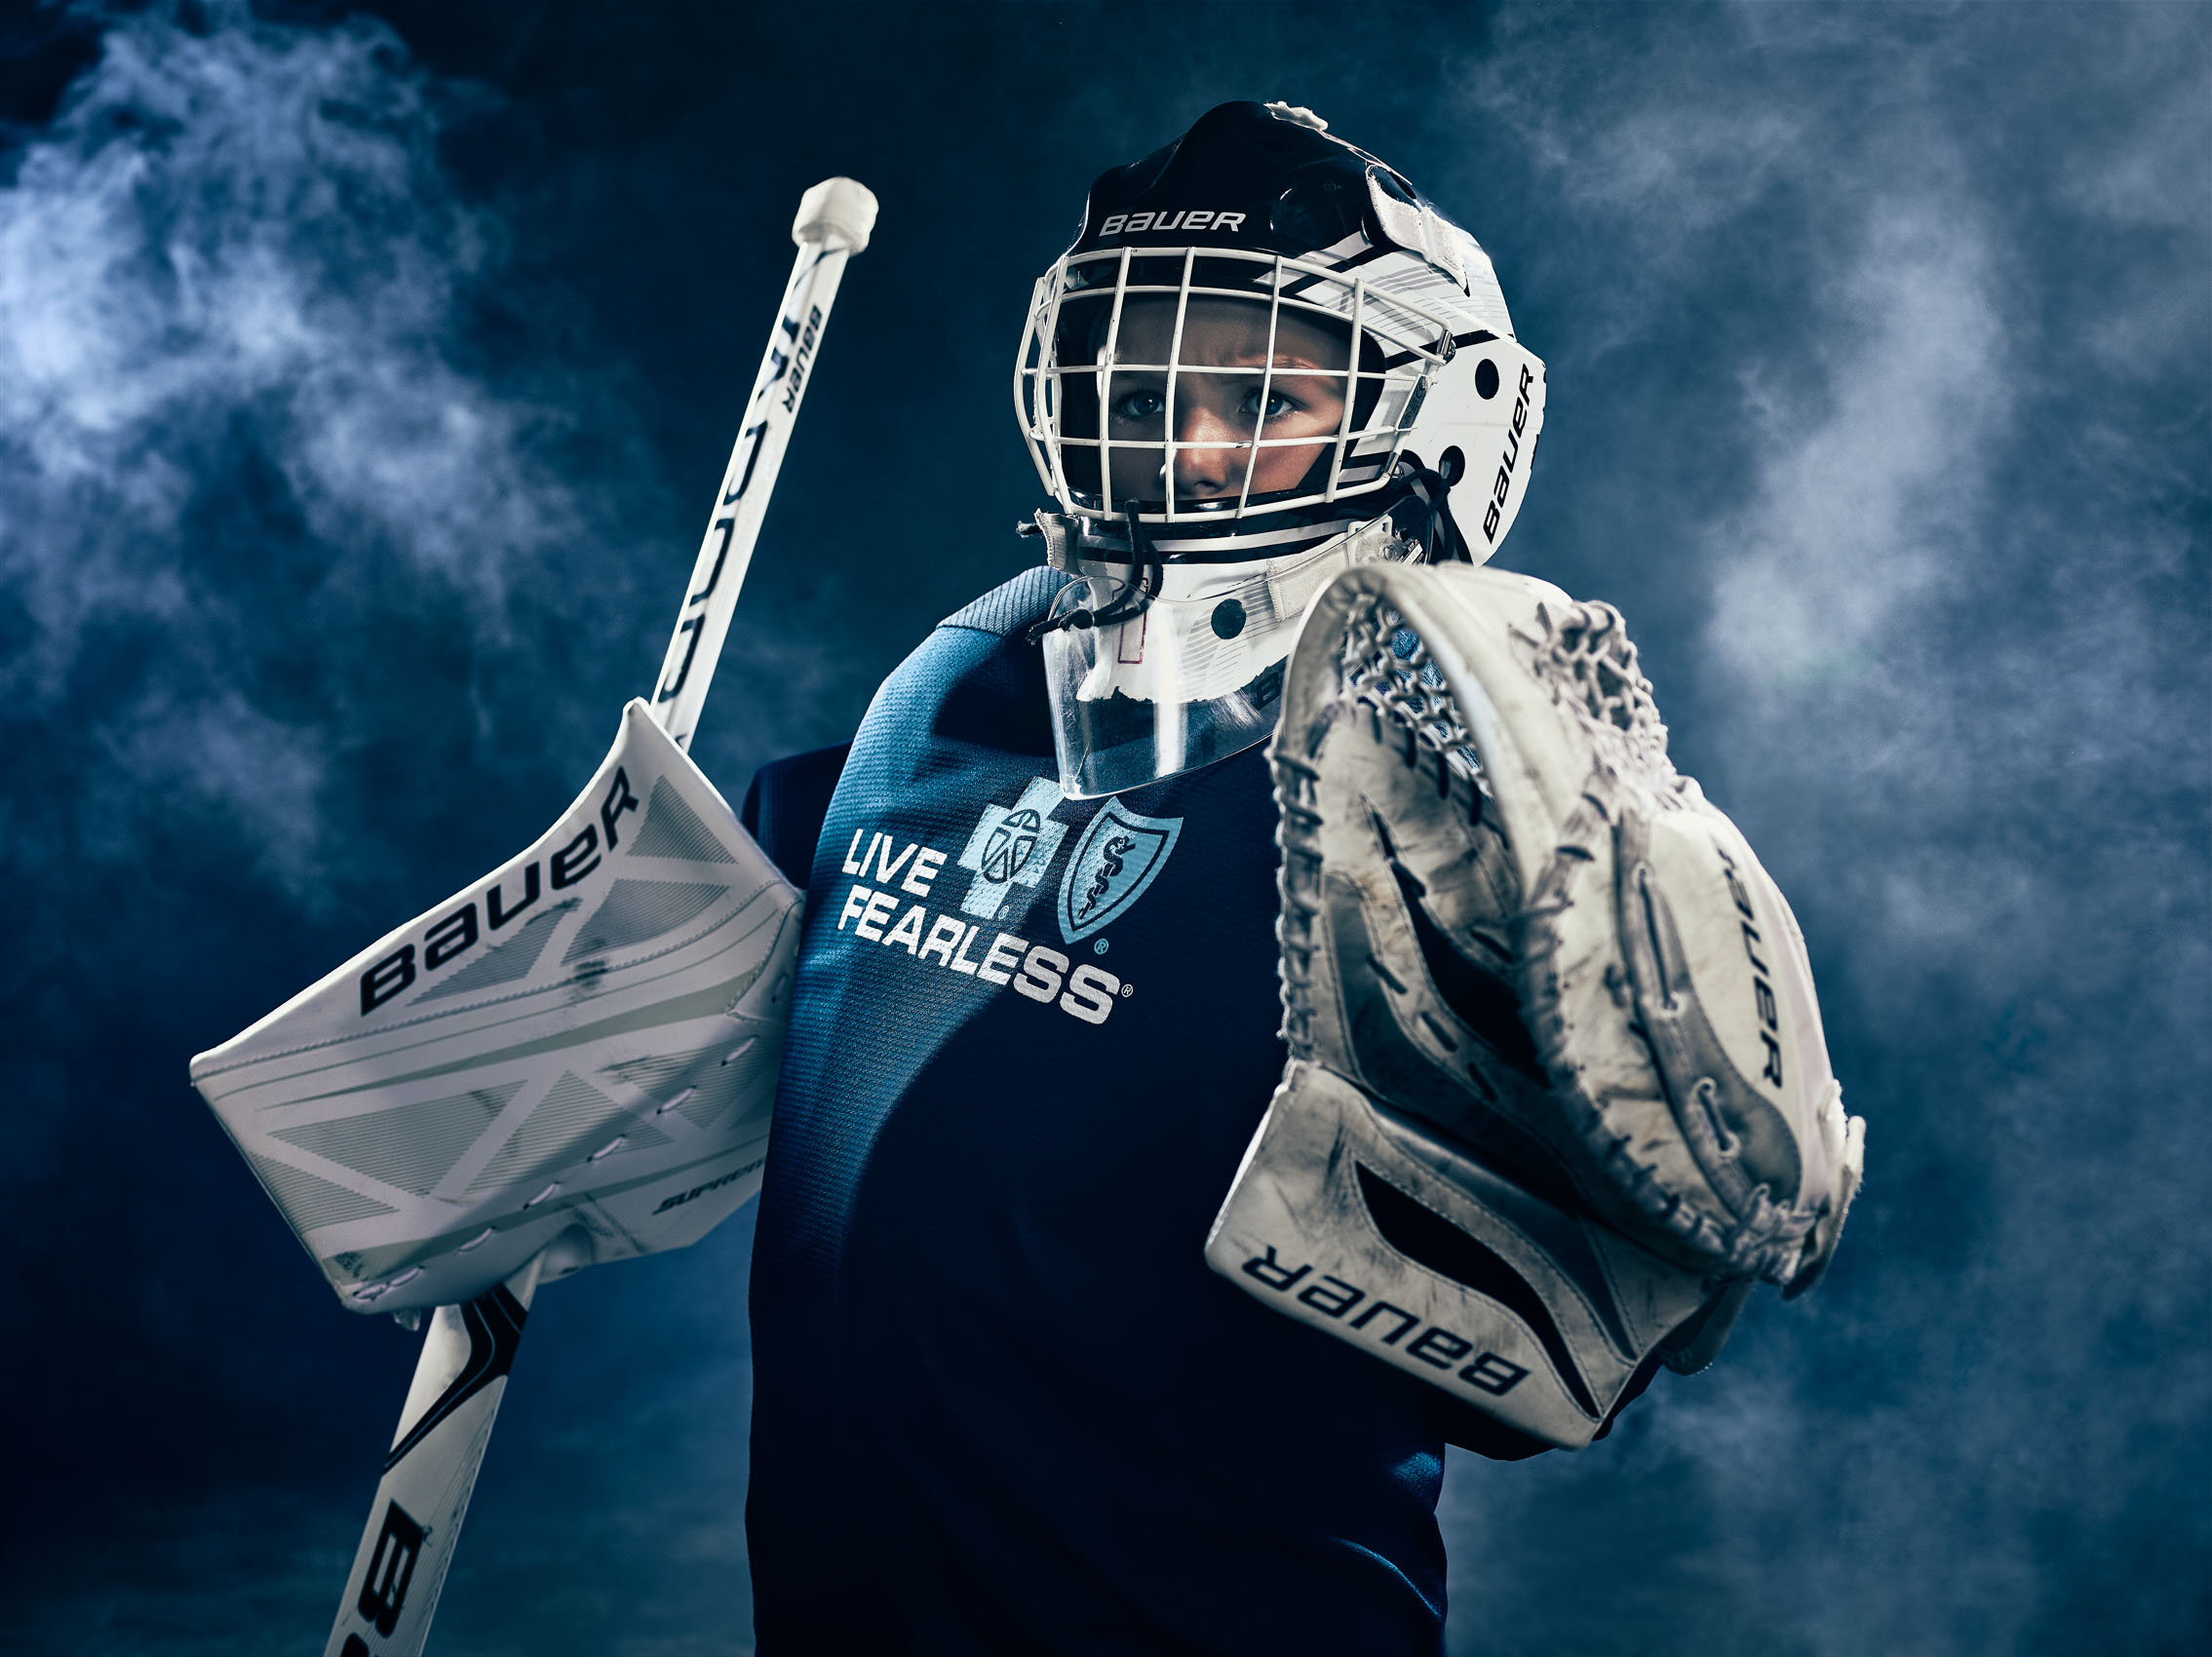 LIVE FEARLESS  — YOUTH HOCKEY PLAYER FOR BCBS WESTERN NEW YORK